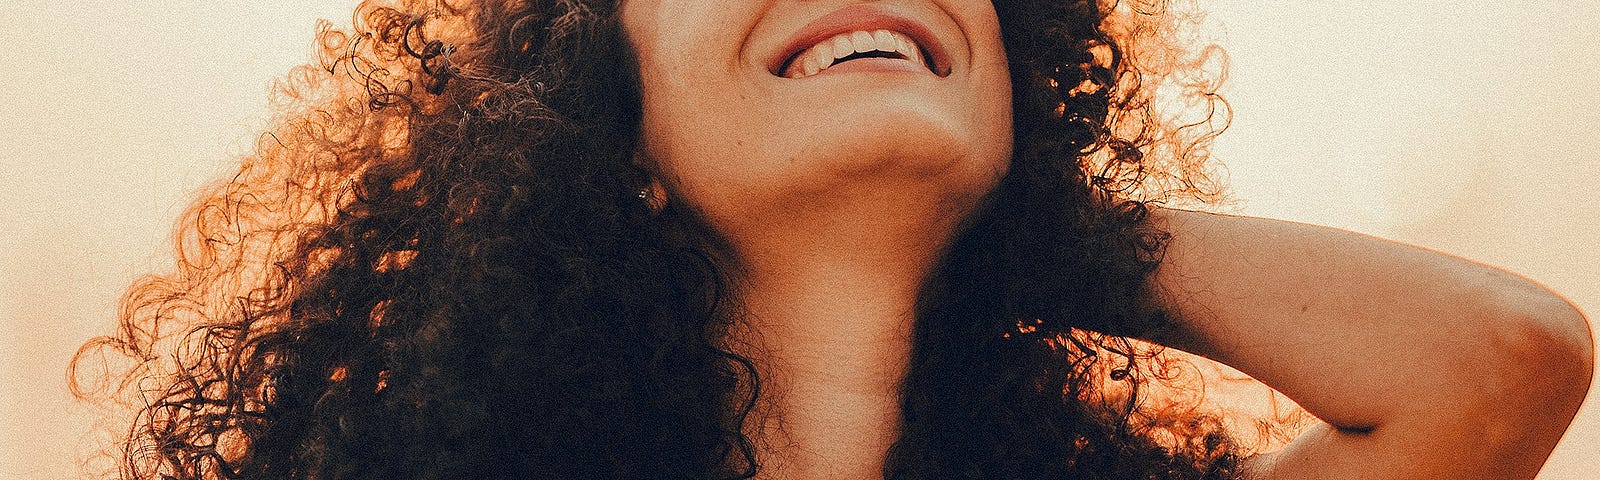 Woman with voluminous curly hair leaning her head back and laughing.